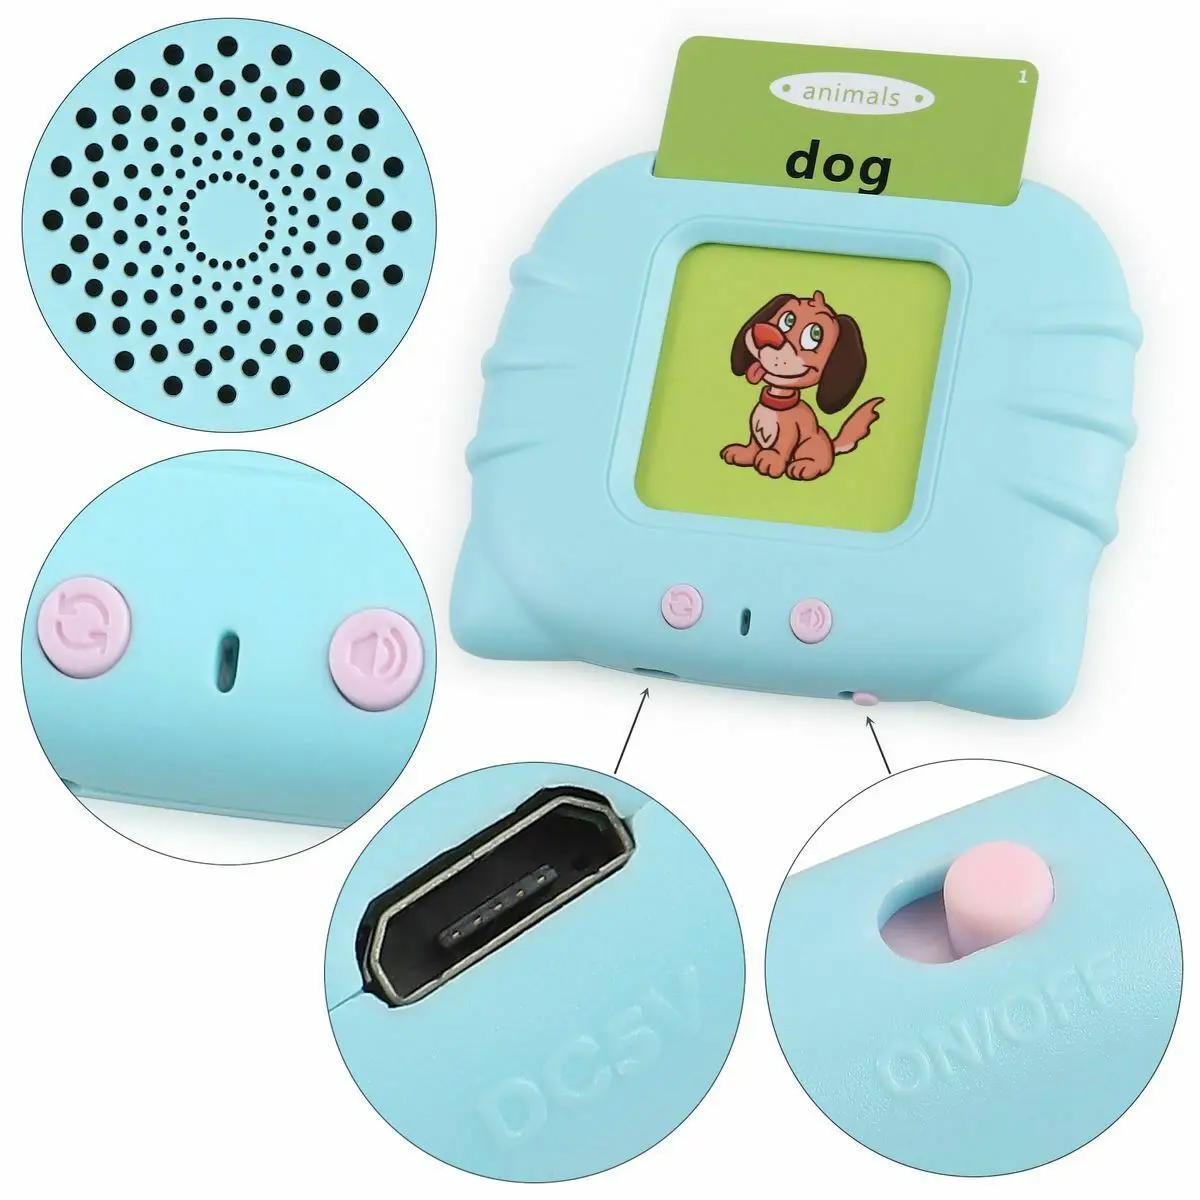 Funny plug-in card Language learning machine Bilingual Card Learning Machine Early Education with flash card for kids